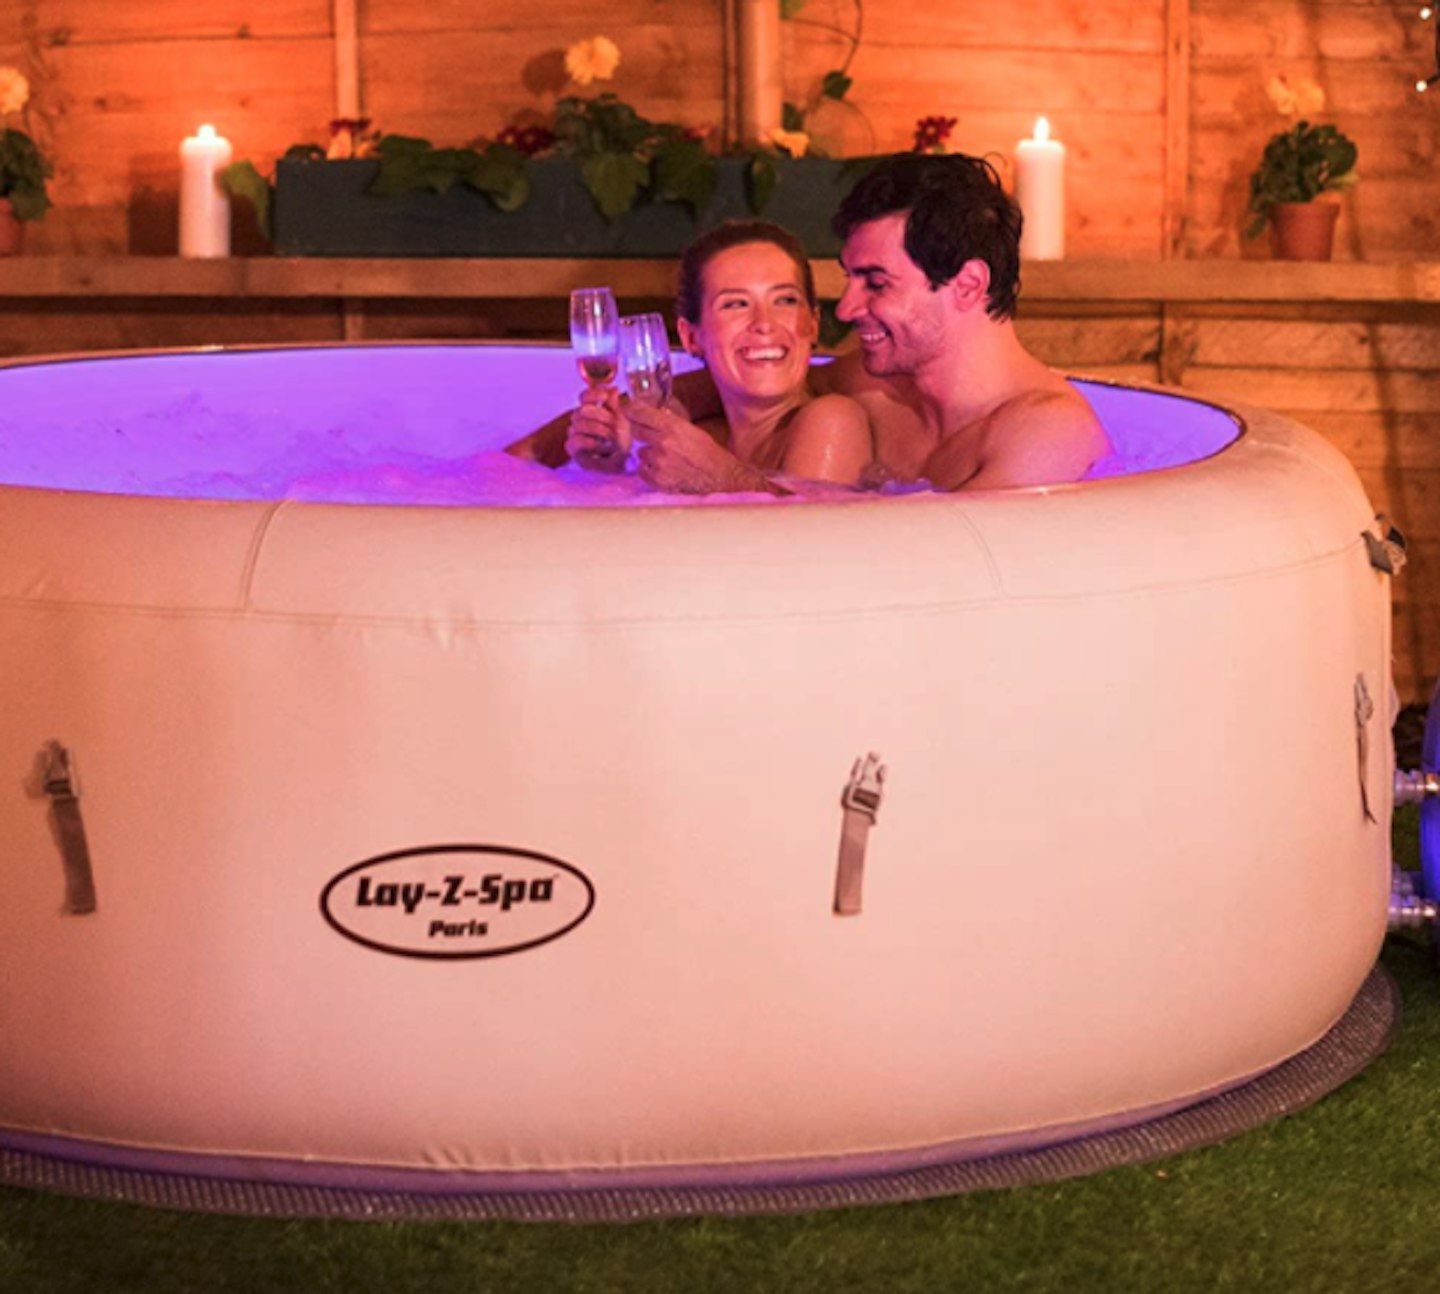 Lay -Z-Spa Paris Hot Tub with LED Lights